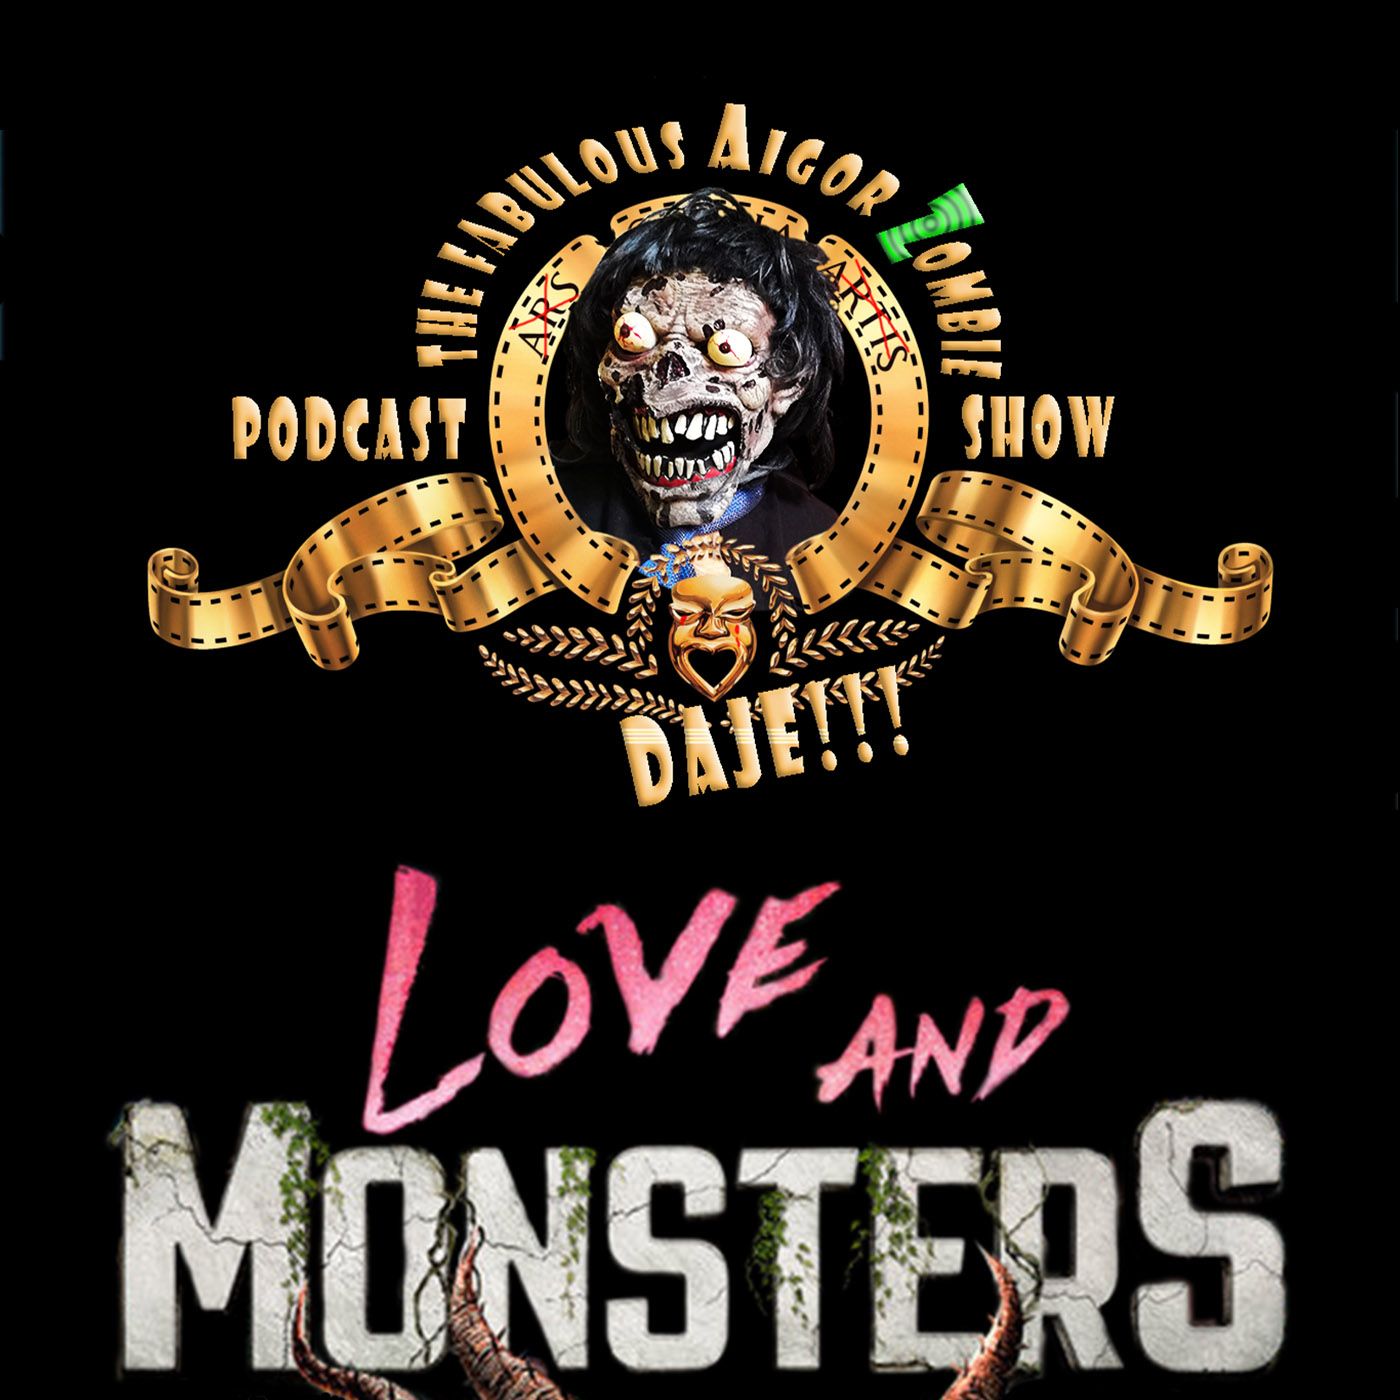 Aigor Zombie Podcast Show - Love and Monsters